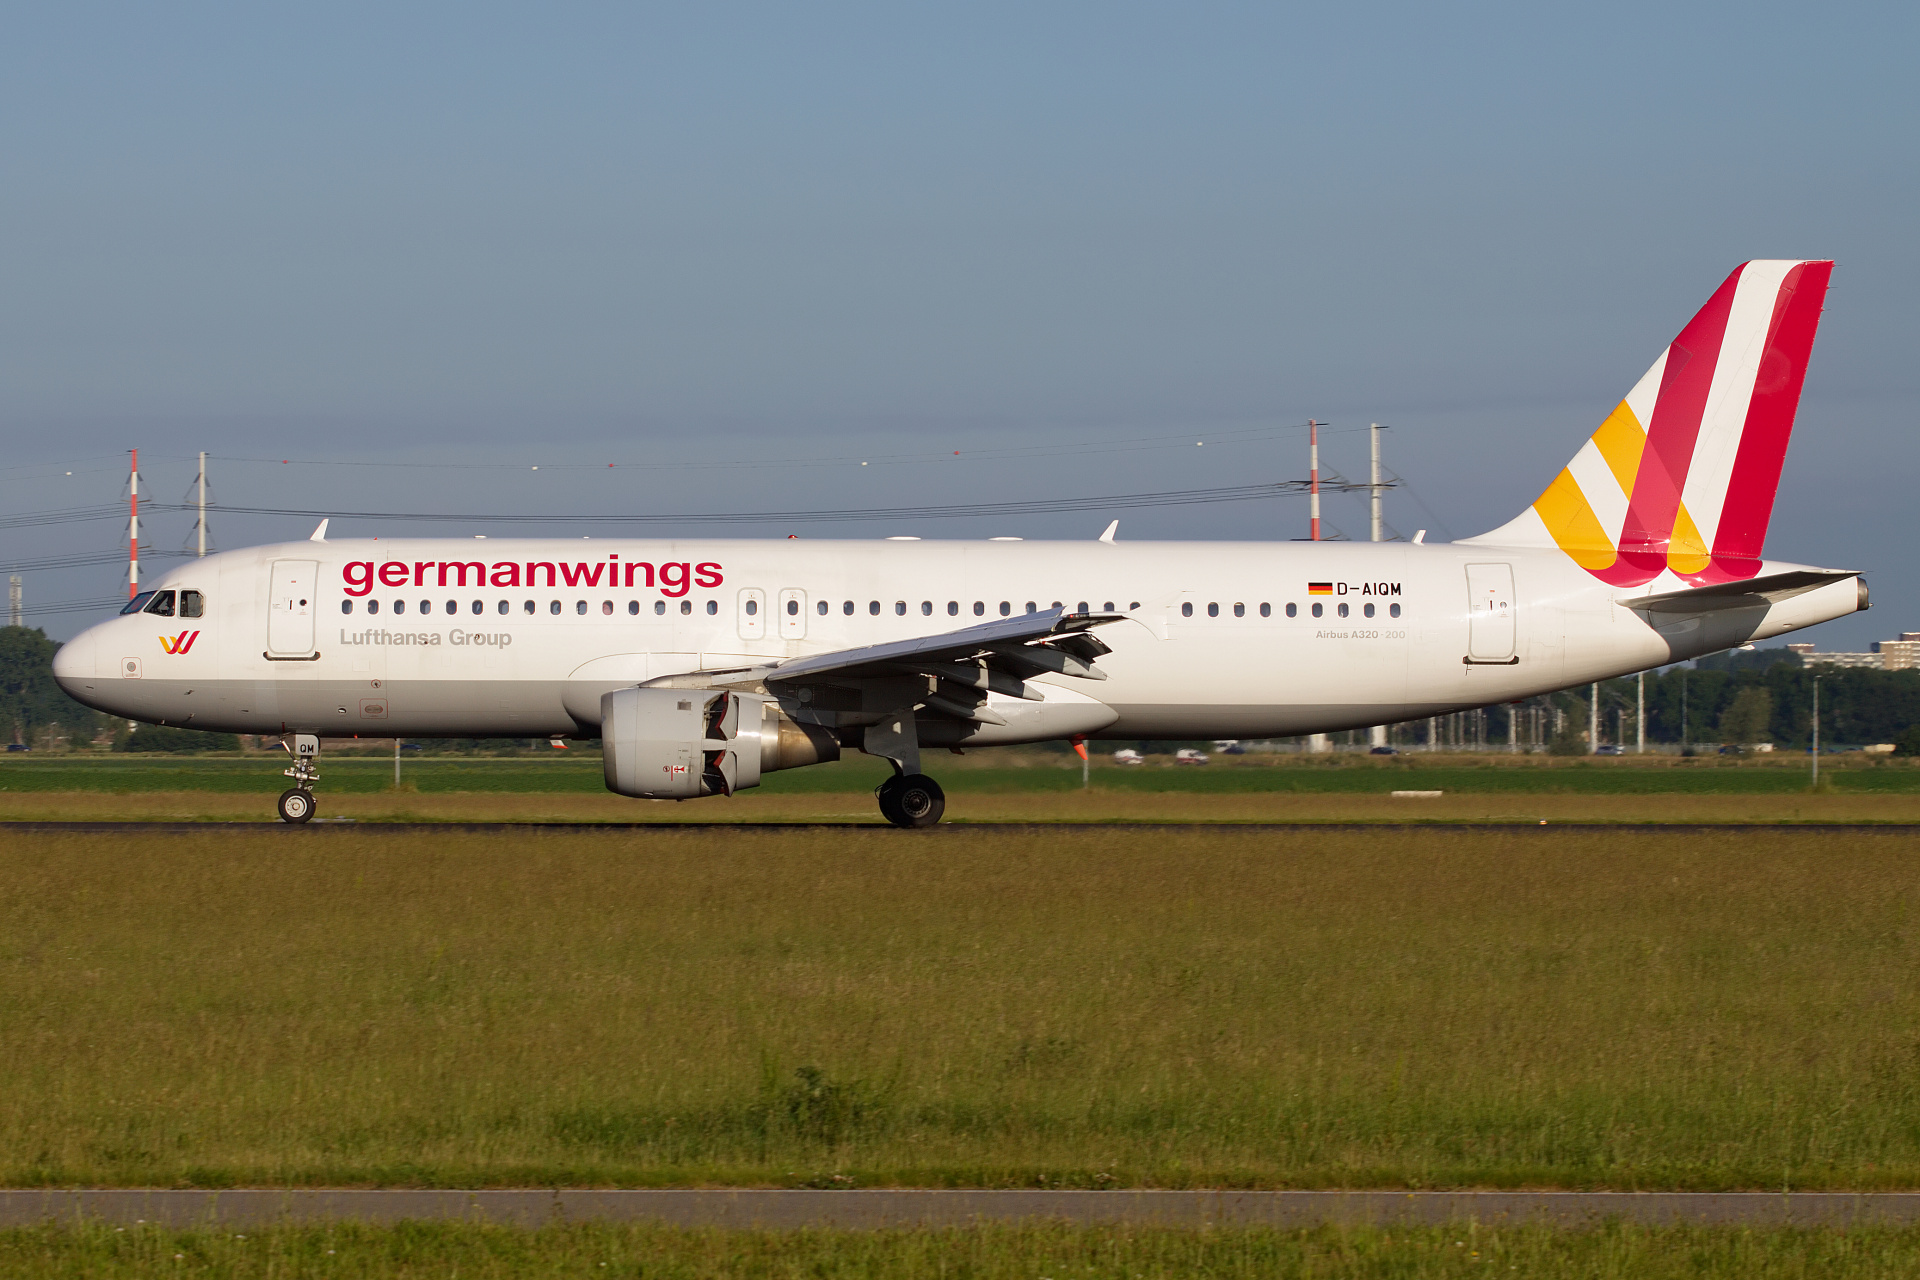 D-AIQM, Germanwings (Samoloty » Spotting na Schiphol » Airbus A320-200)